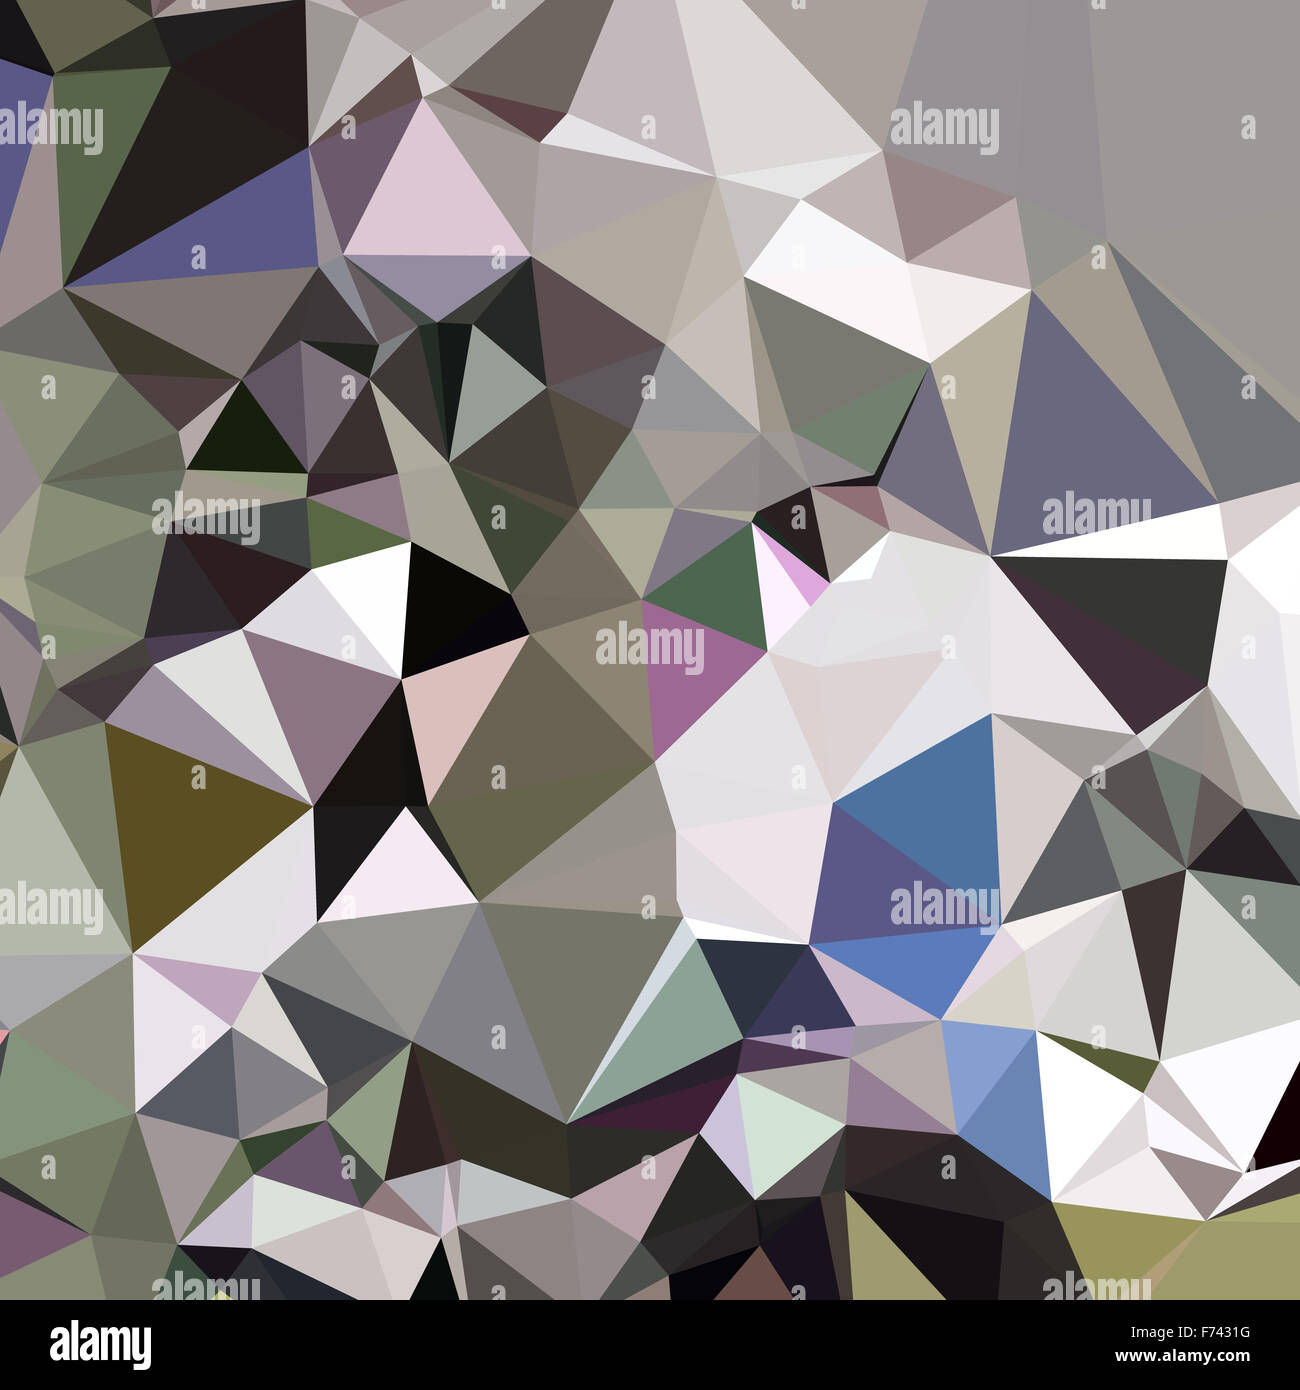 Low polygon style illustration of a davy grey abstract geometric background. Stock Photo